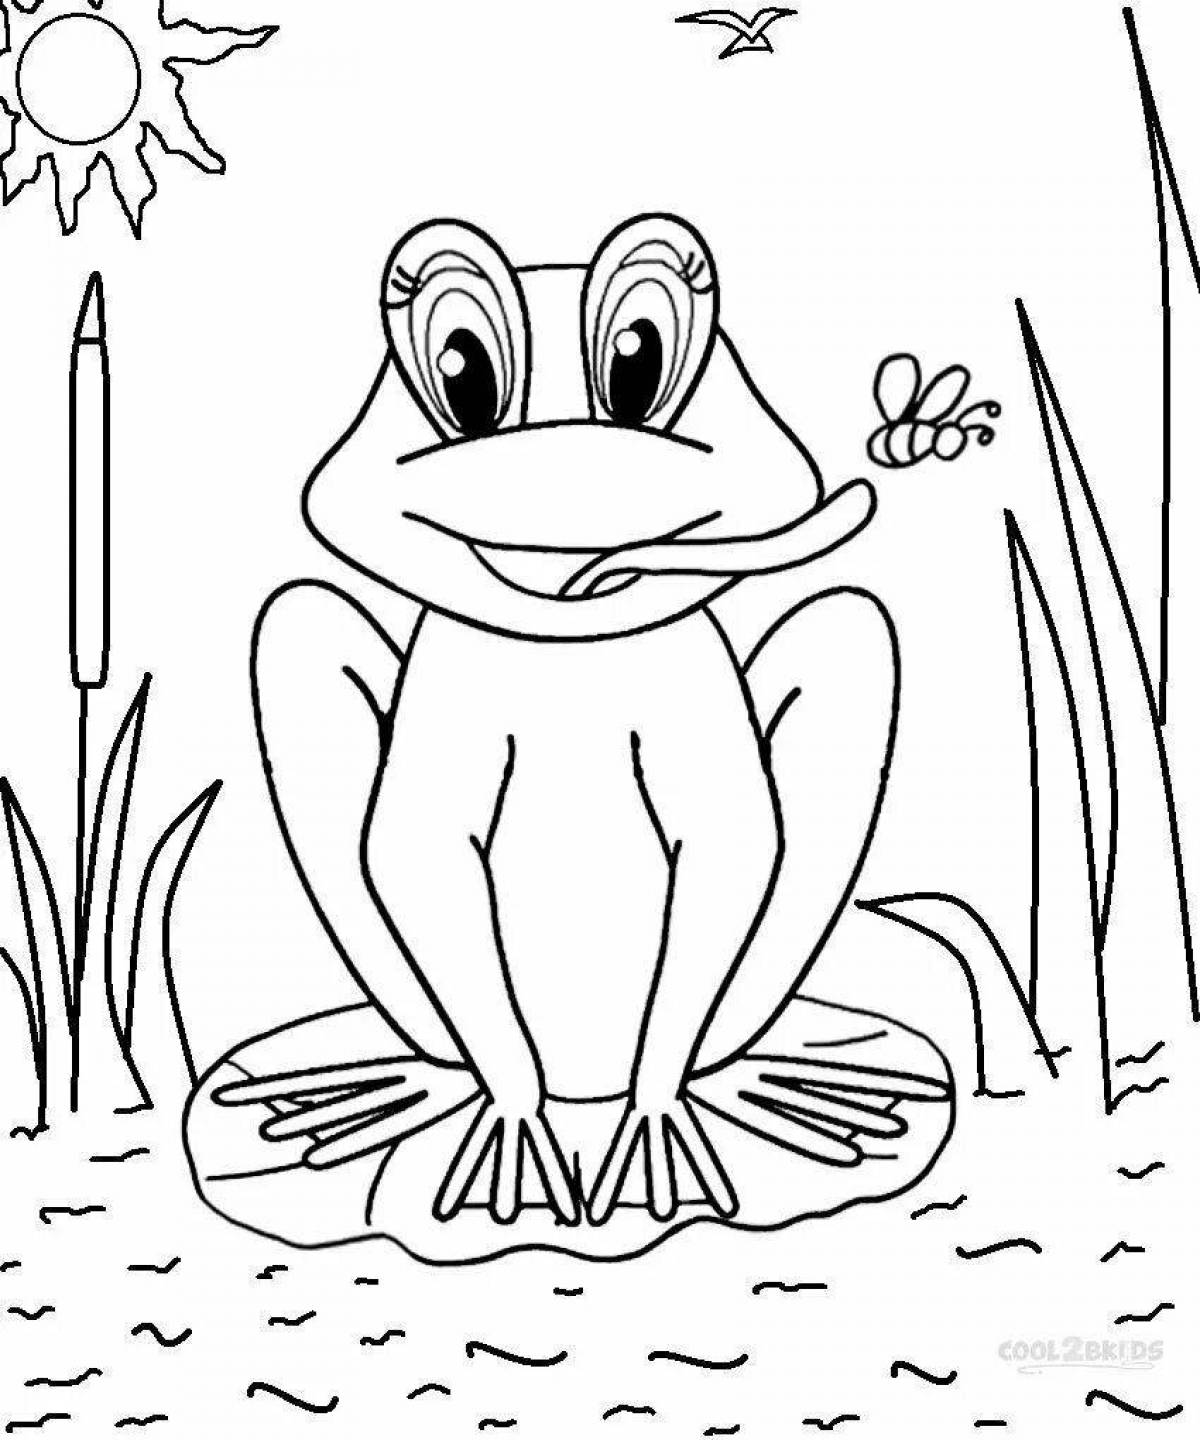 Coloring page amazing frog traveler